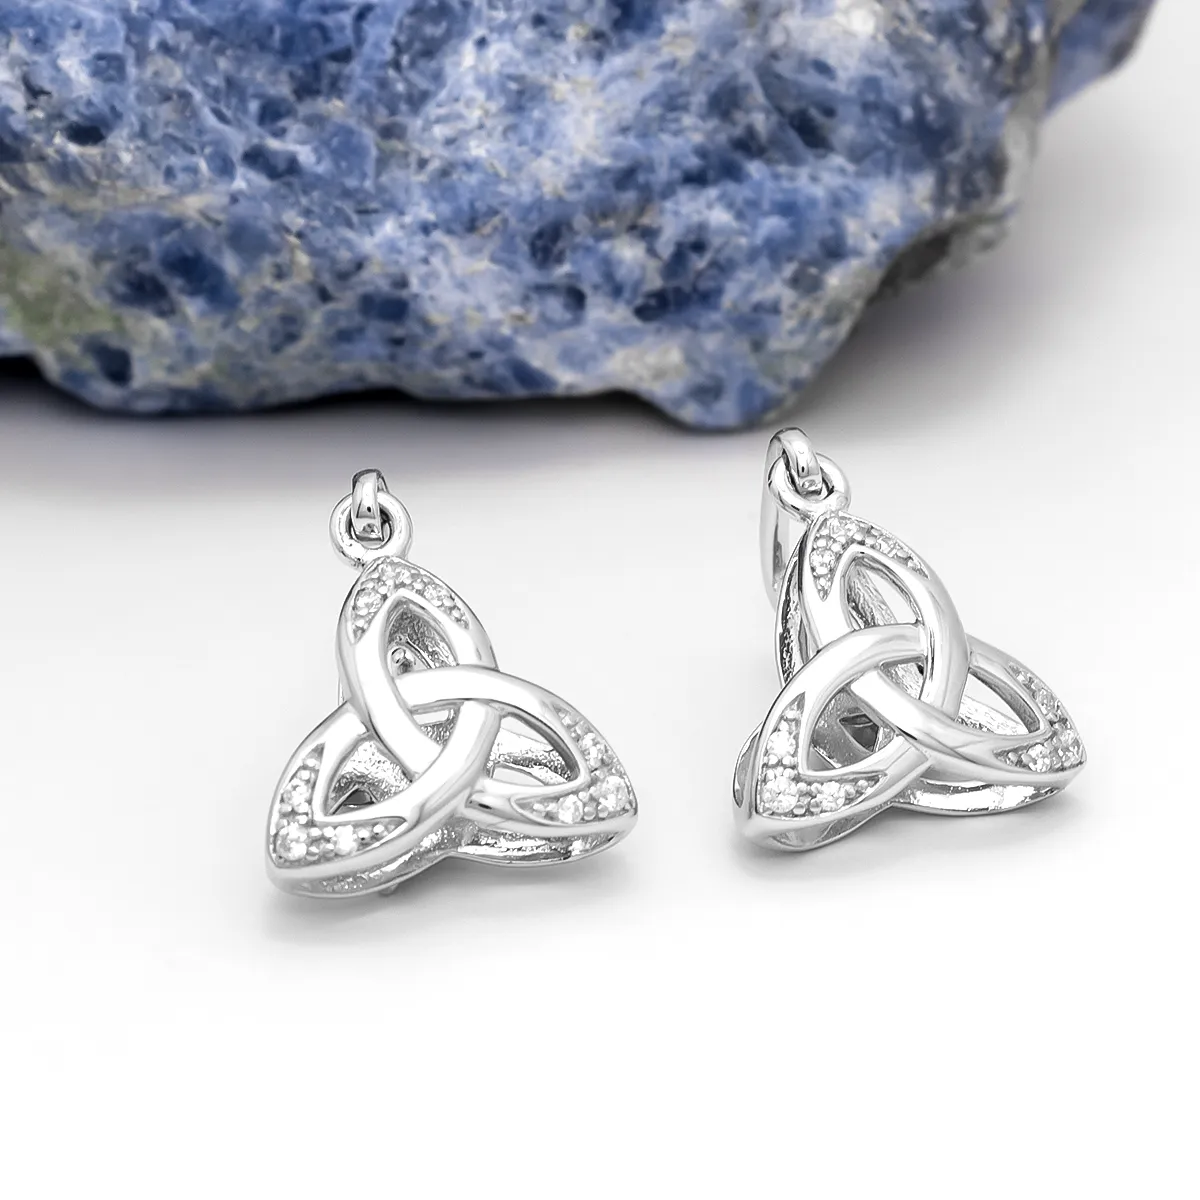 Silver Trinity Knot Earrings with Cubic Zirconia...